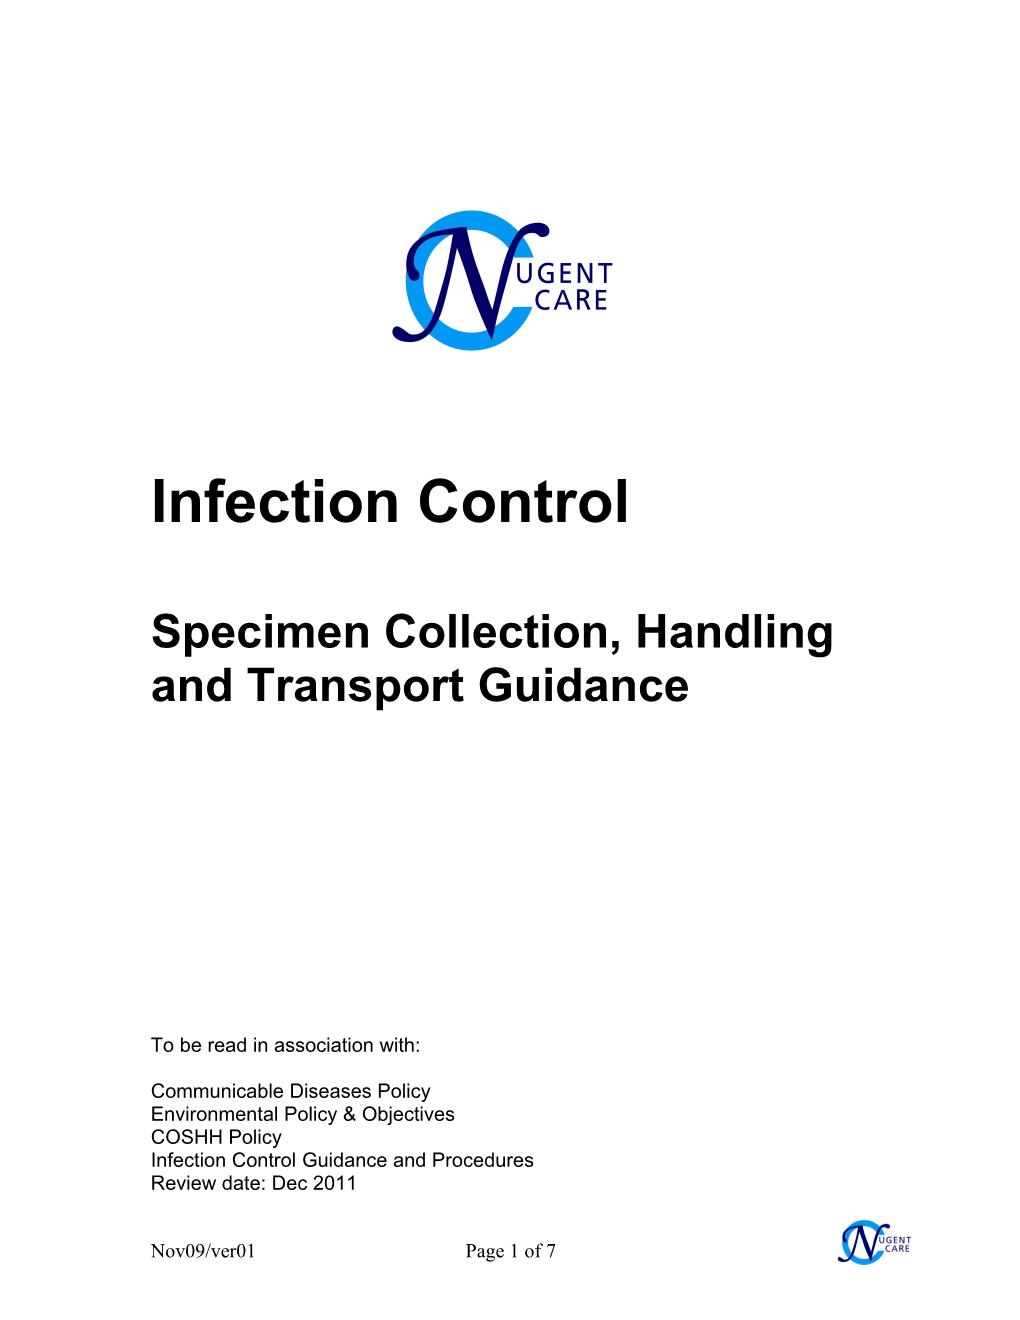 Infection Control Policy s2